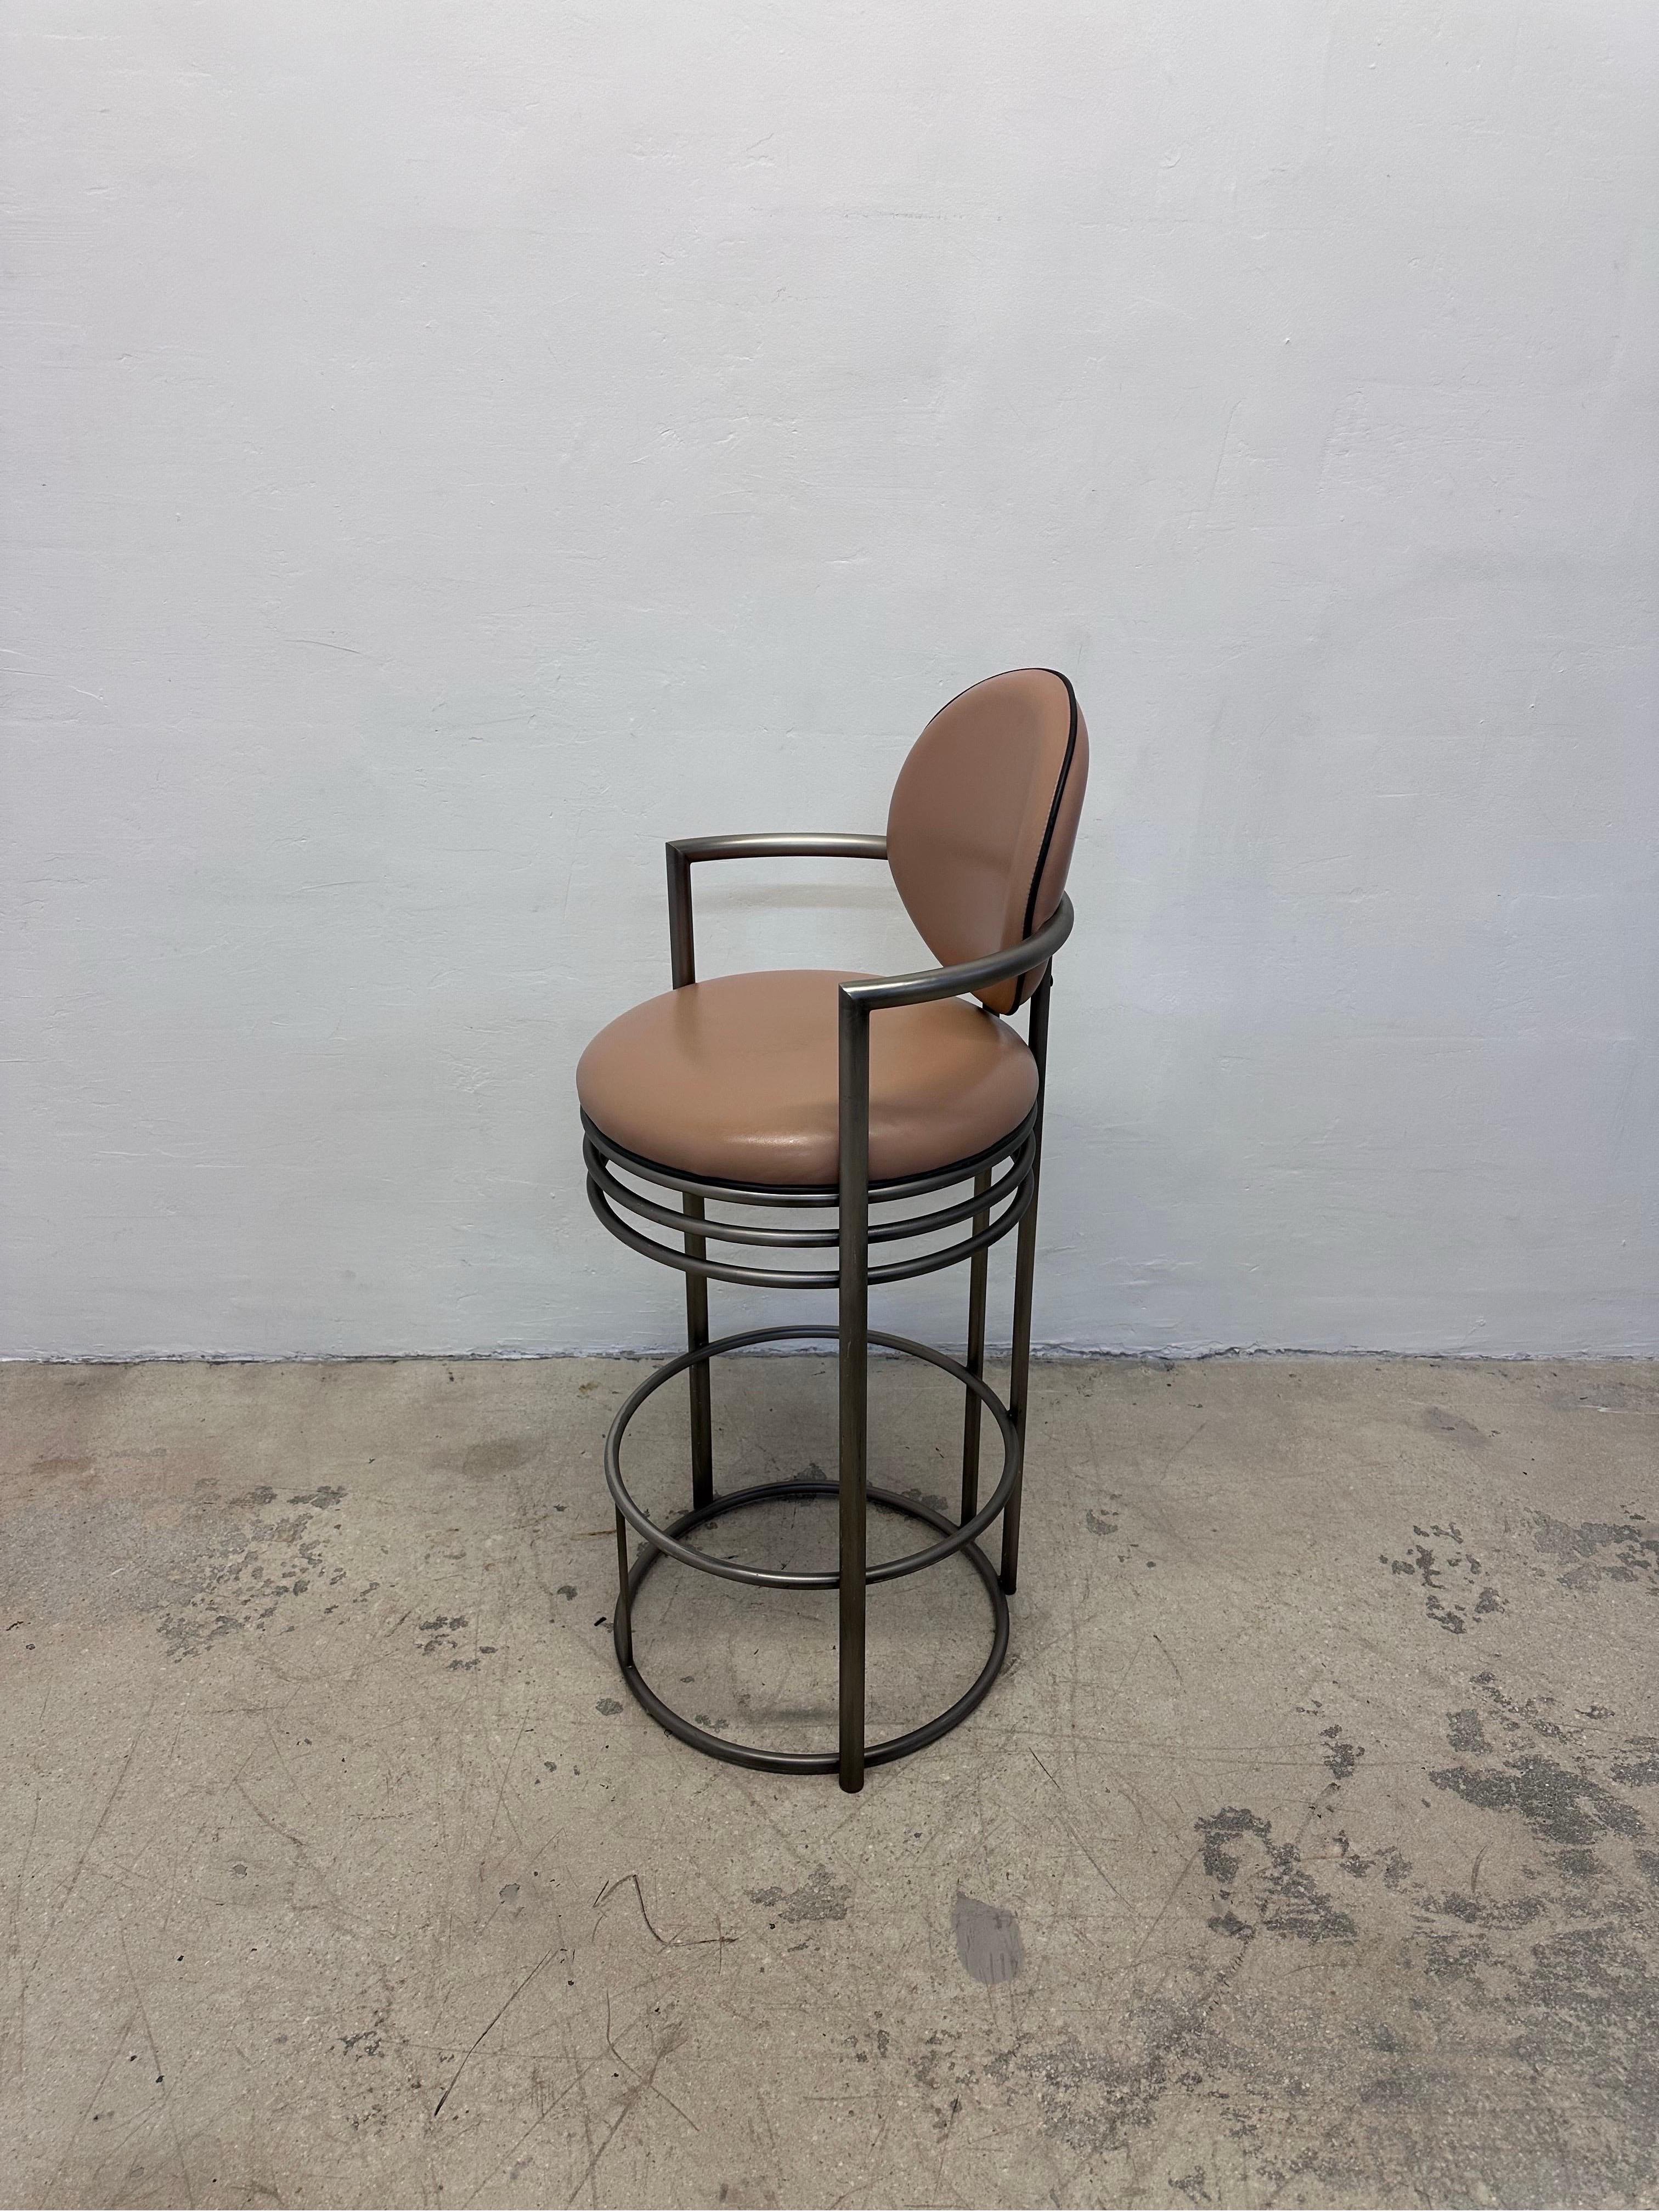 Steel Design Institute America Deco Revival Bar Stools With Arms, 1980s - Set of Three For Sale